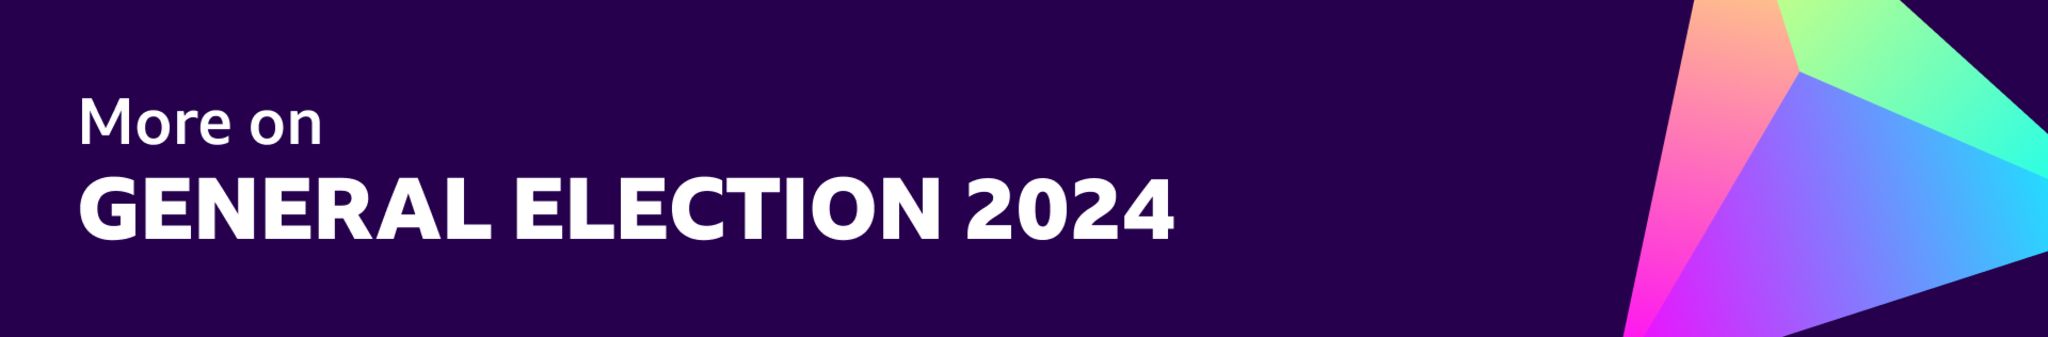 More on the general election banner with a purple background and multicoloured pyramid